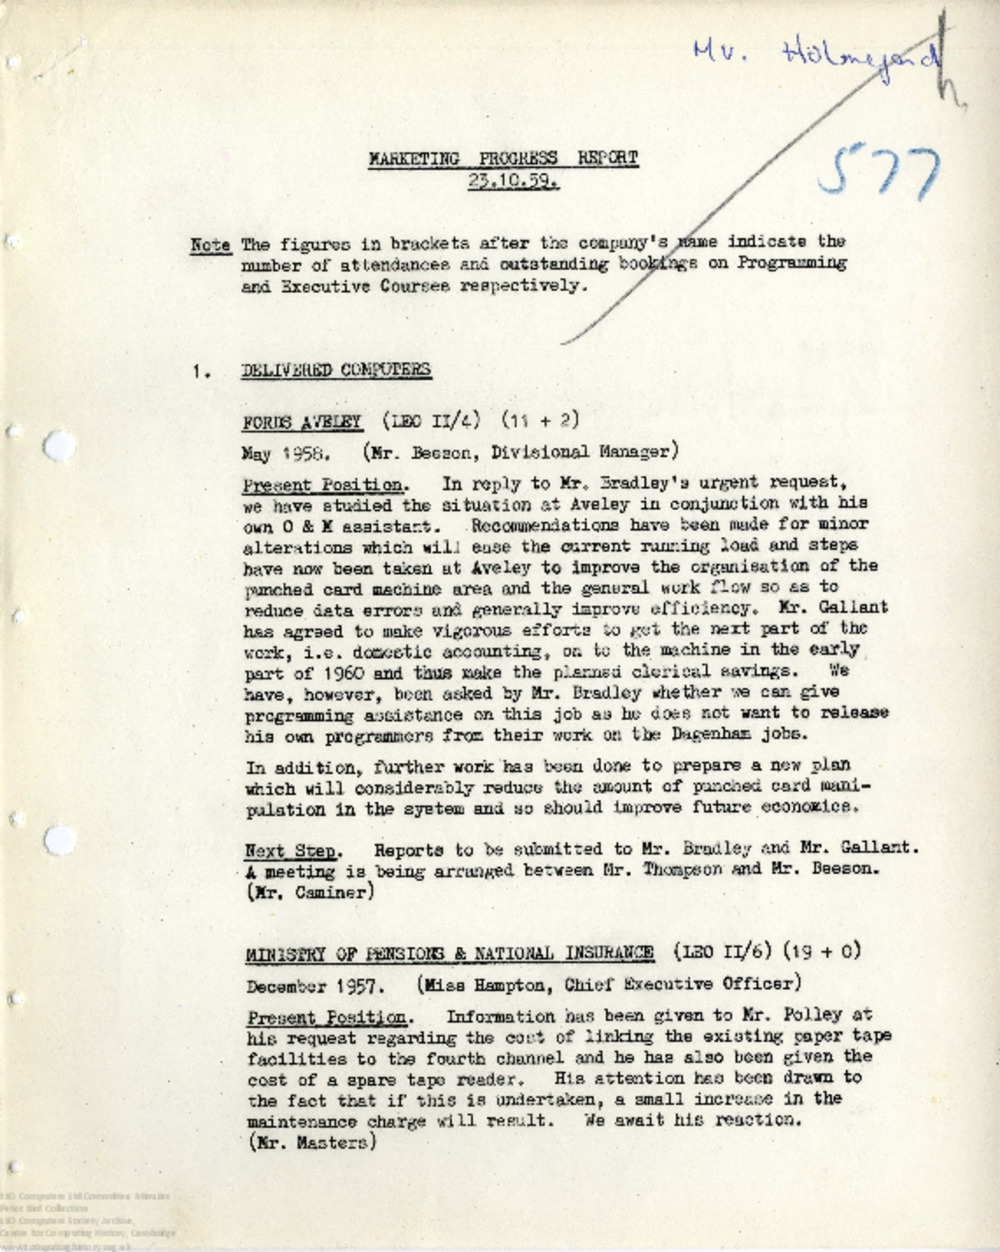 Article: 64482 Consultancy and Marketing Progress Report, 23rd October 1959